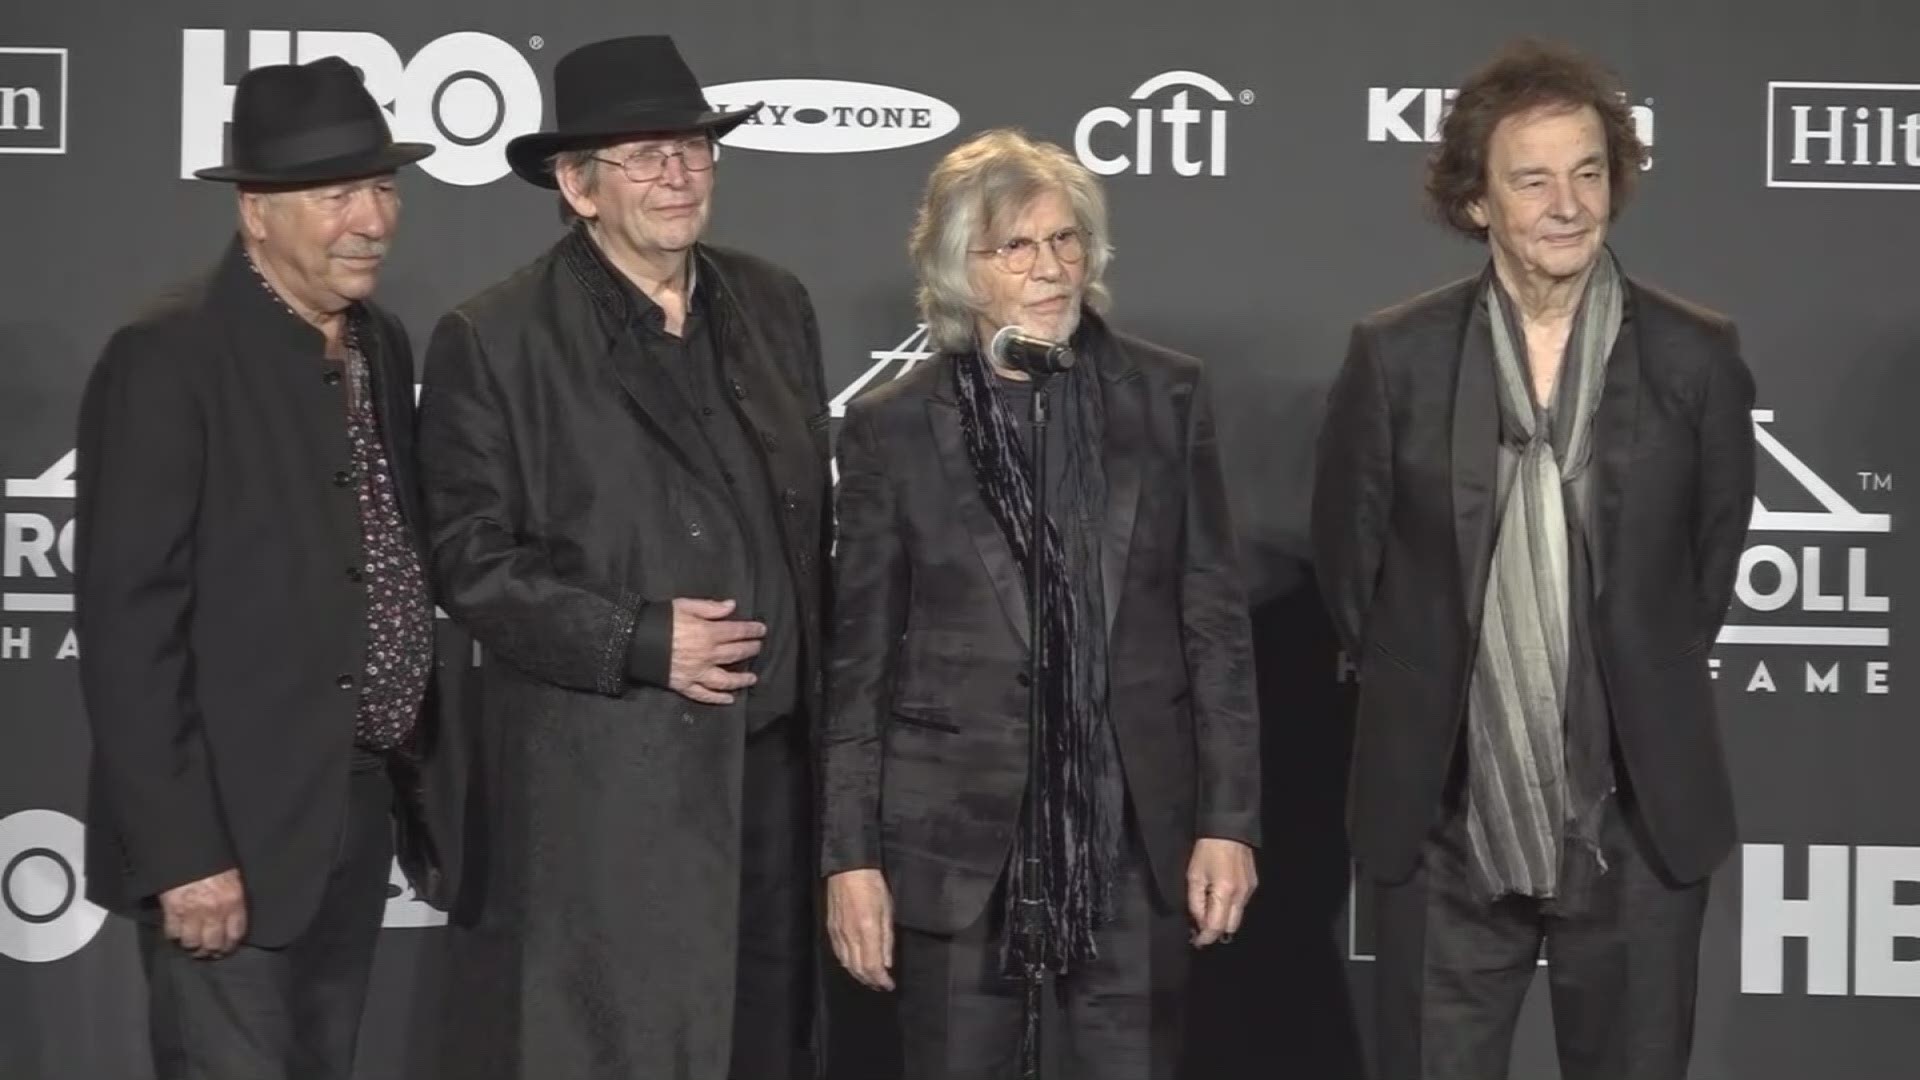 The Zombies backstage at Rock & Roll Hall of Fame induction ceremony